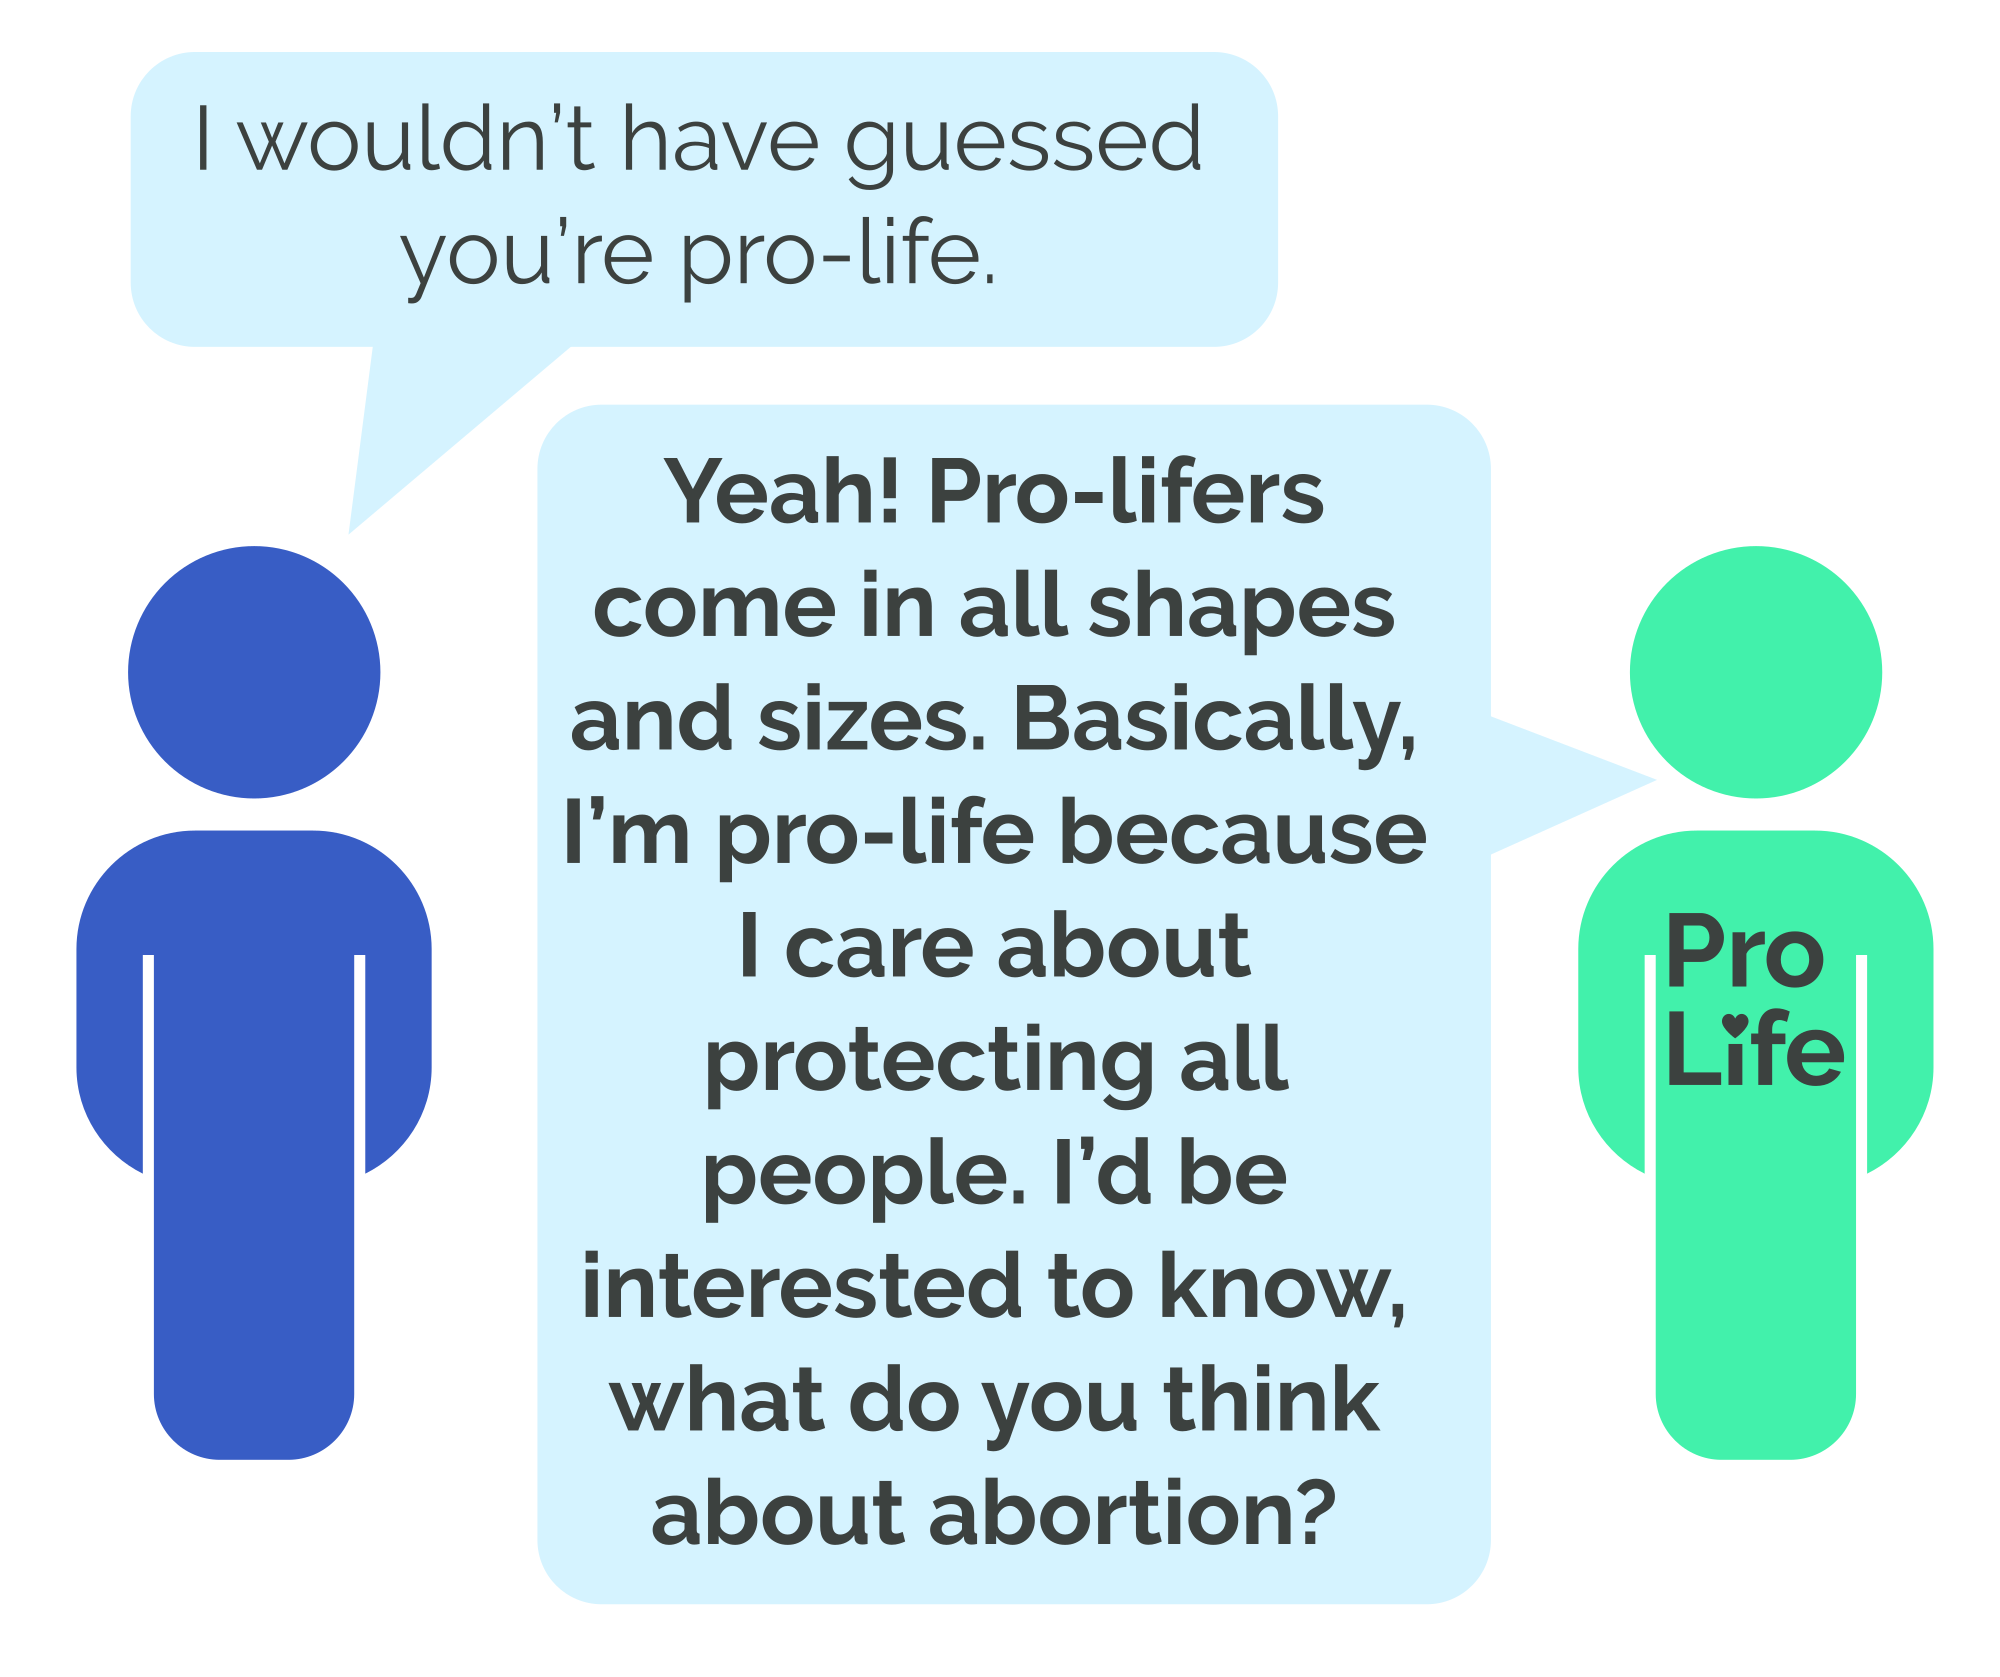 Person 1: I wouldn’t have guessed you’re pro-life. Person 2 (our hero): Yeah! Pro-lifers come in all shapes and sizes. Basically, I’m pro-life because I care about protecting all people. I’d be interested to know, what do you think about abortion?